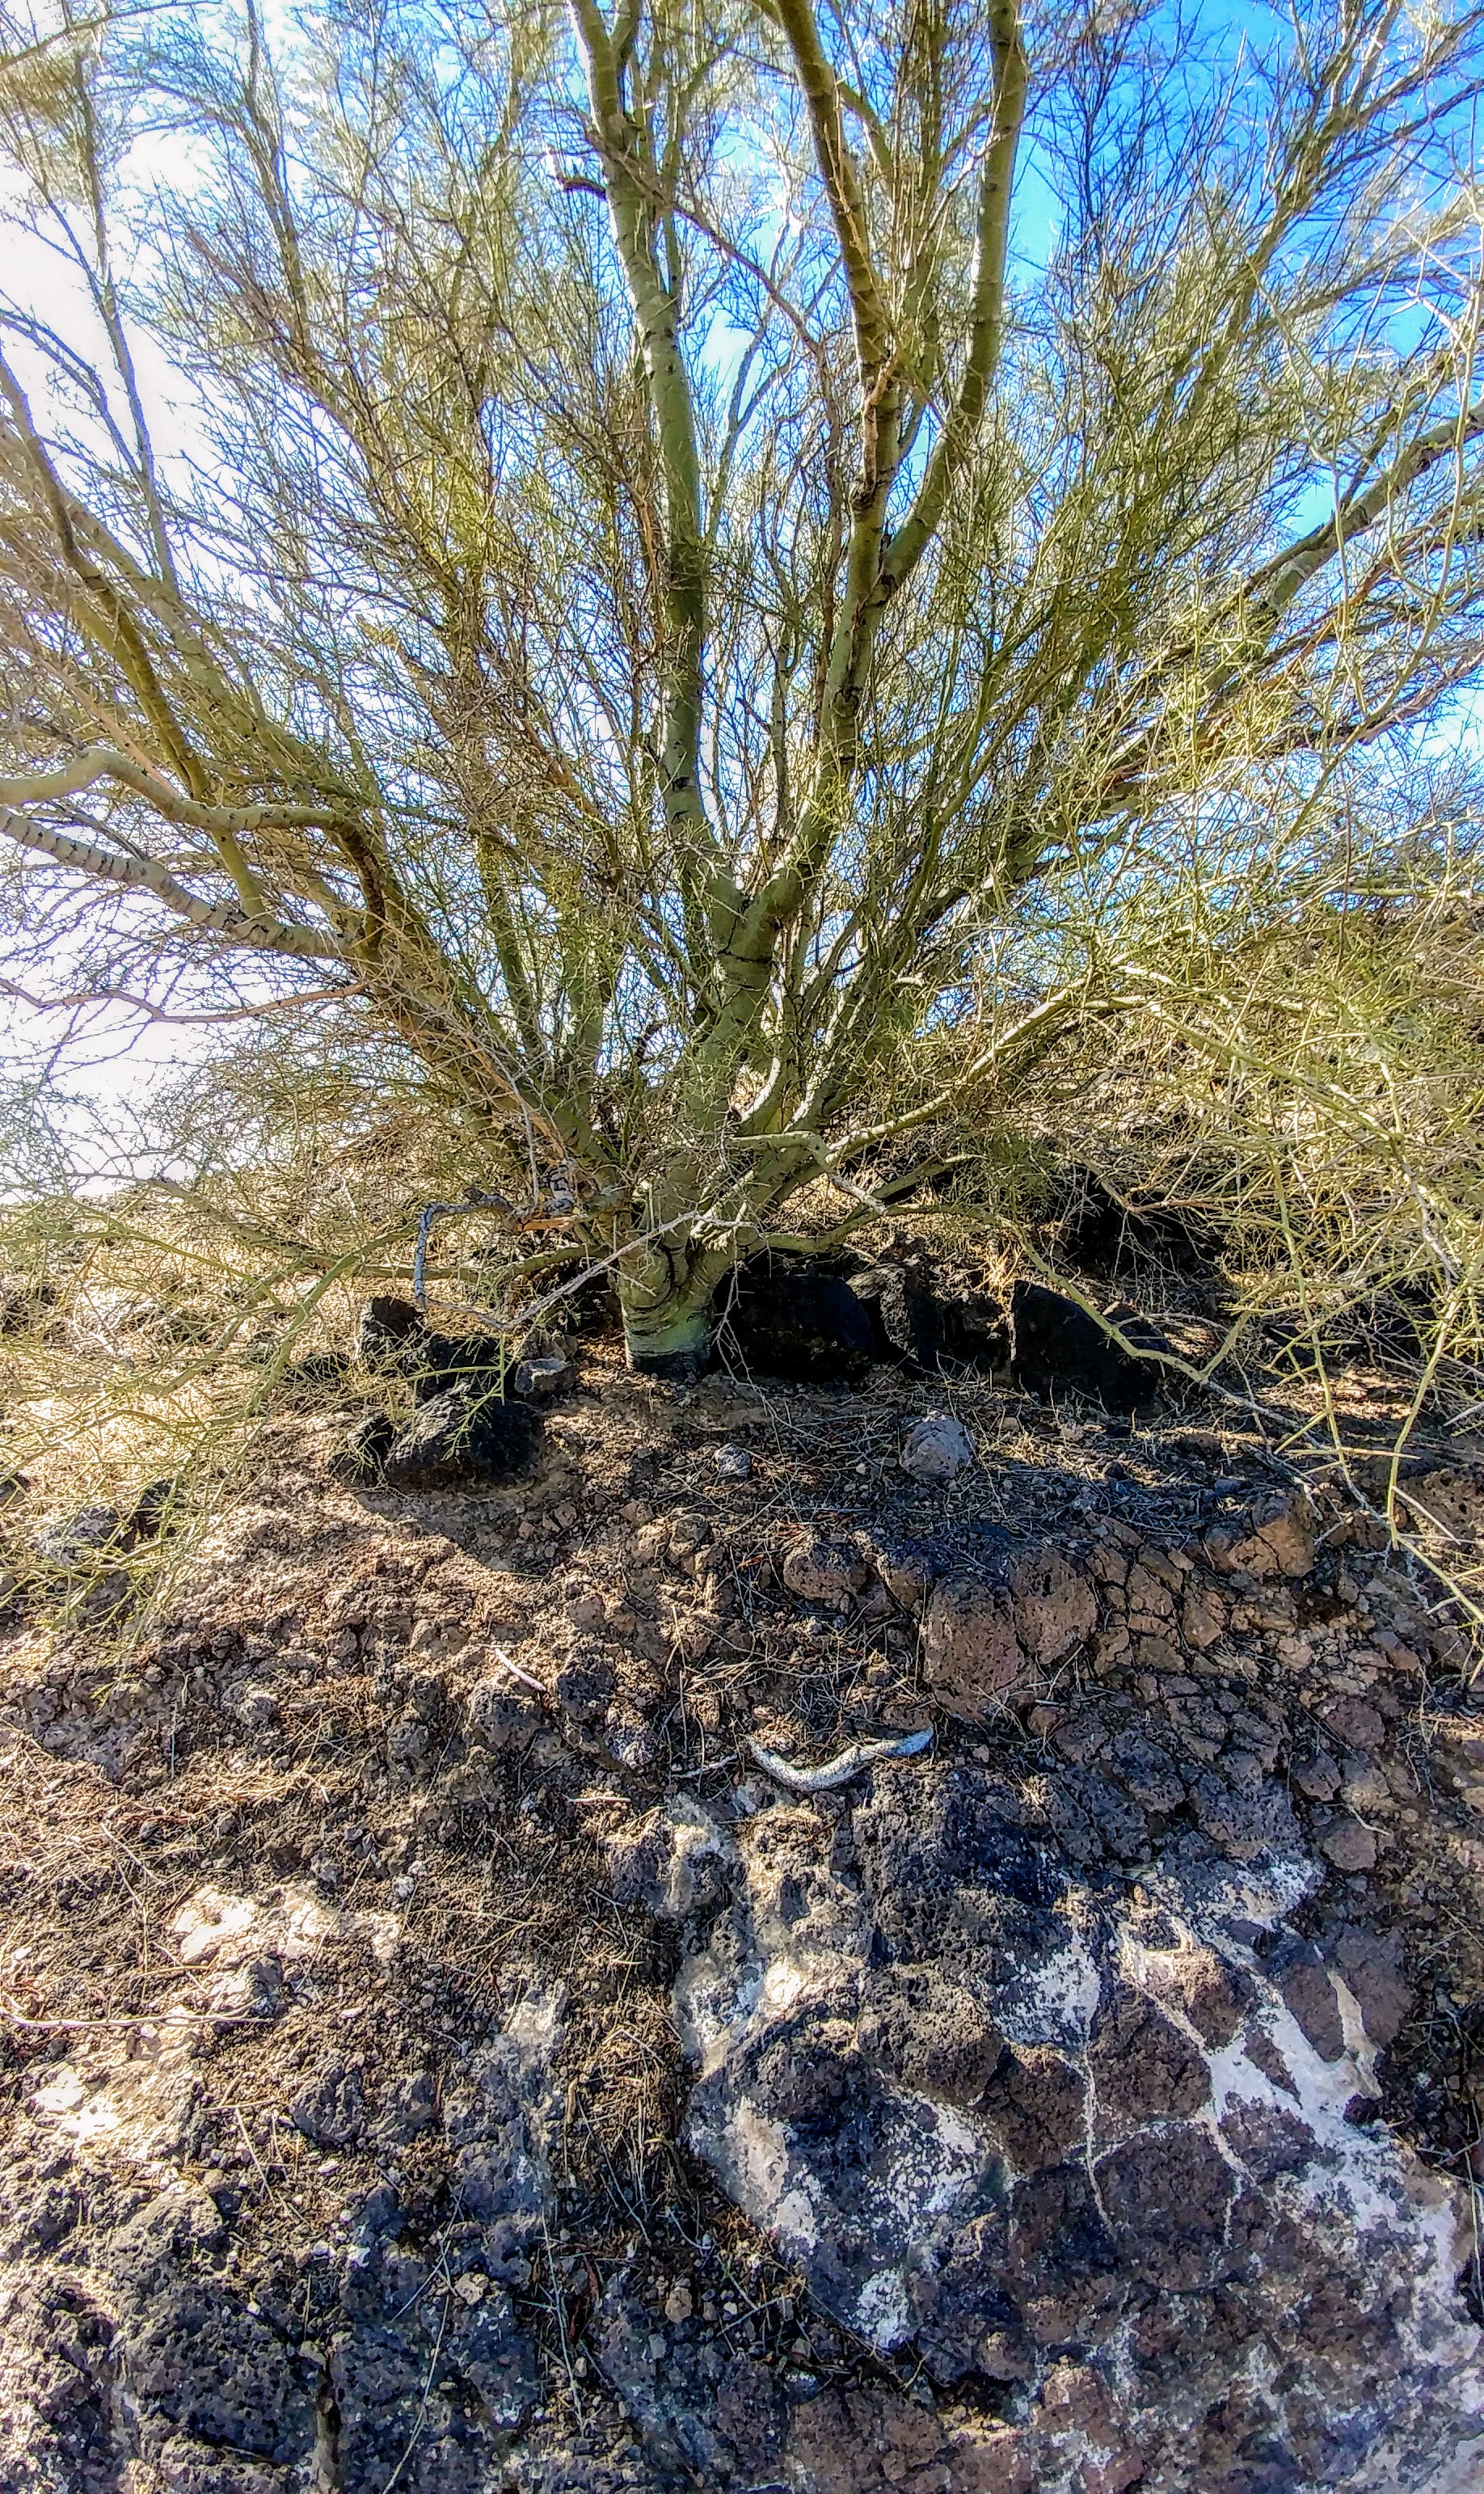 Palo Verde at the side of the trail